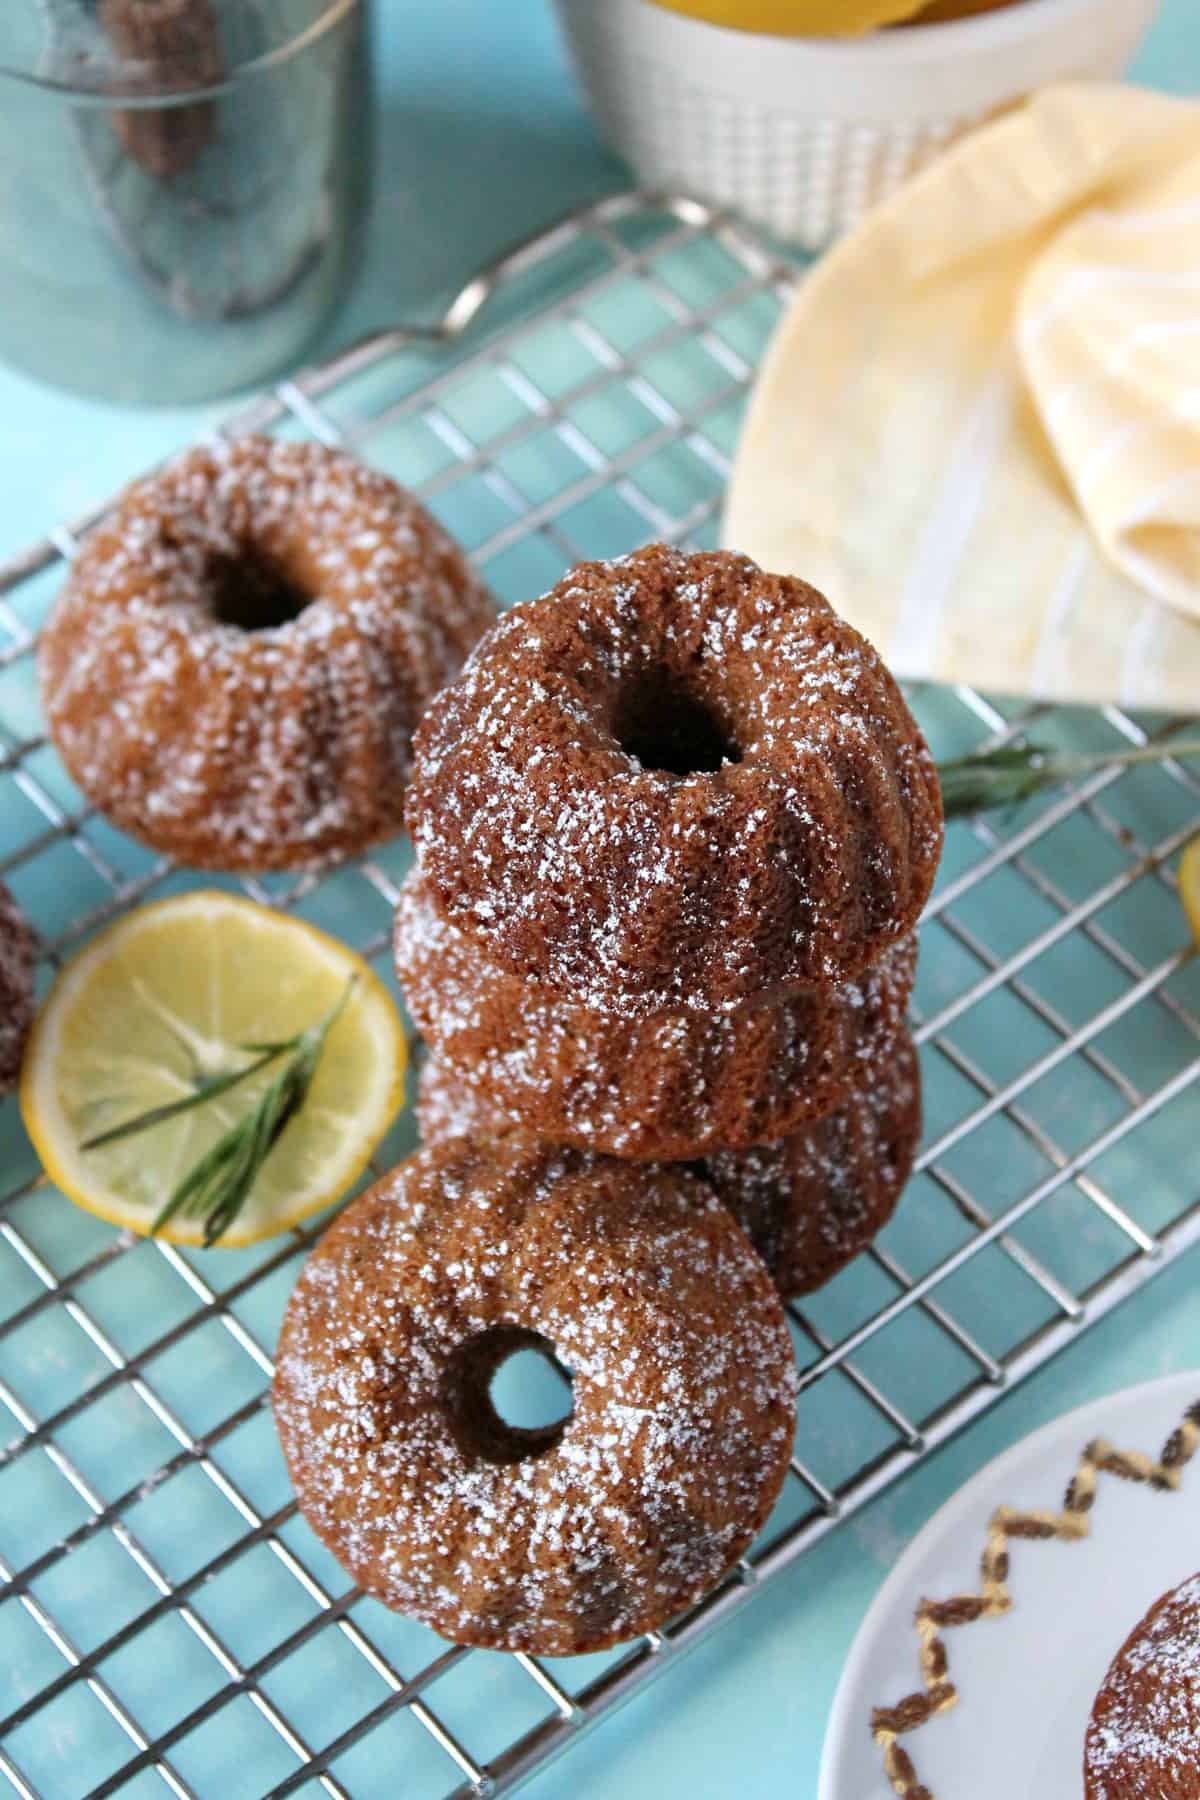 These adorably sweet lemon rosemary mini bundt cakes are the perfect tea time treat